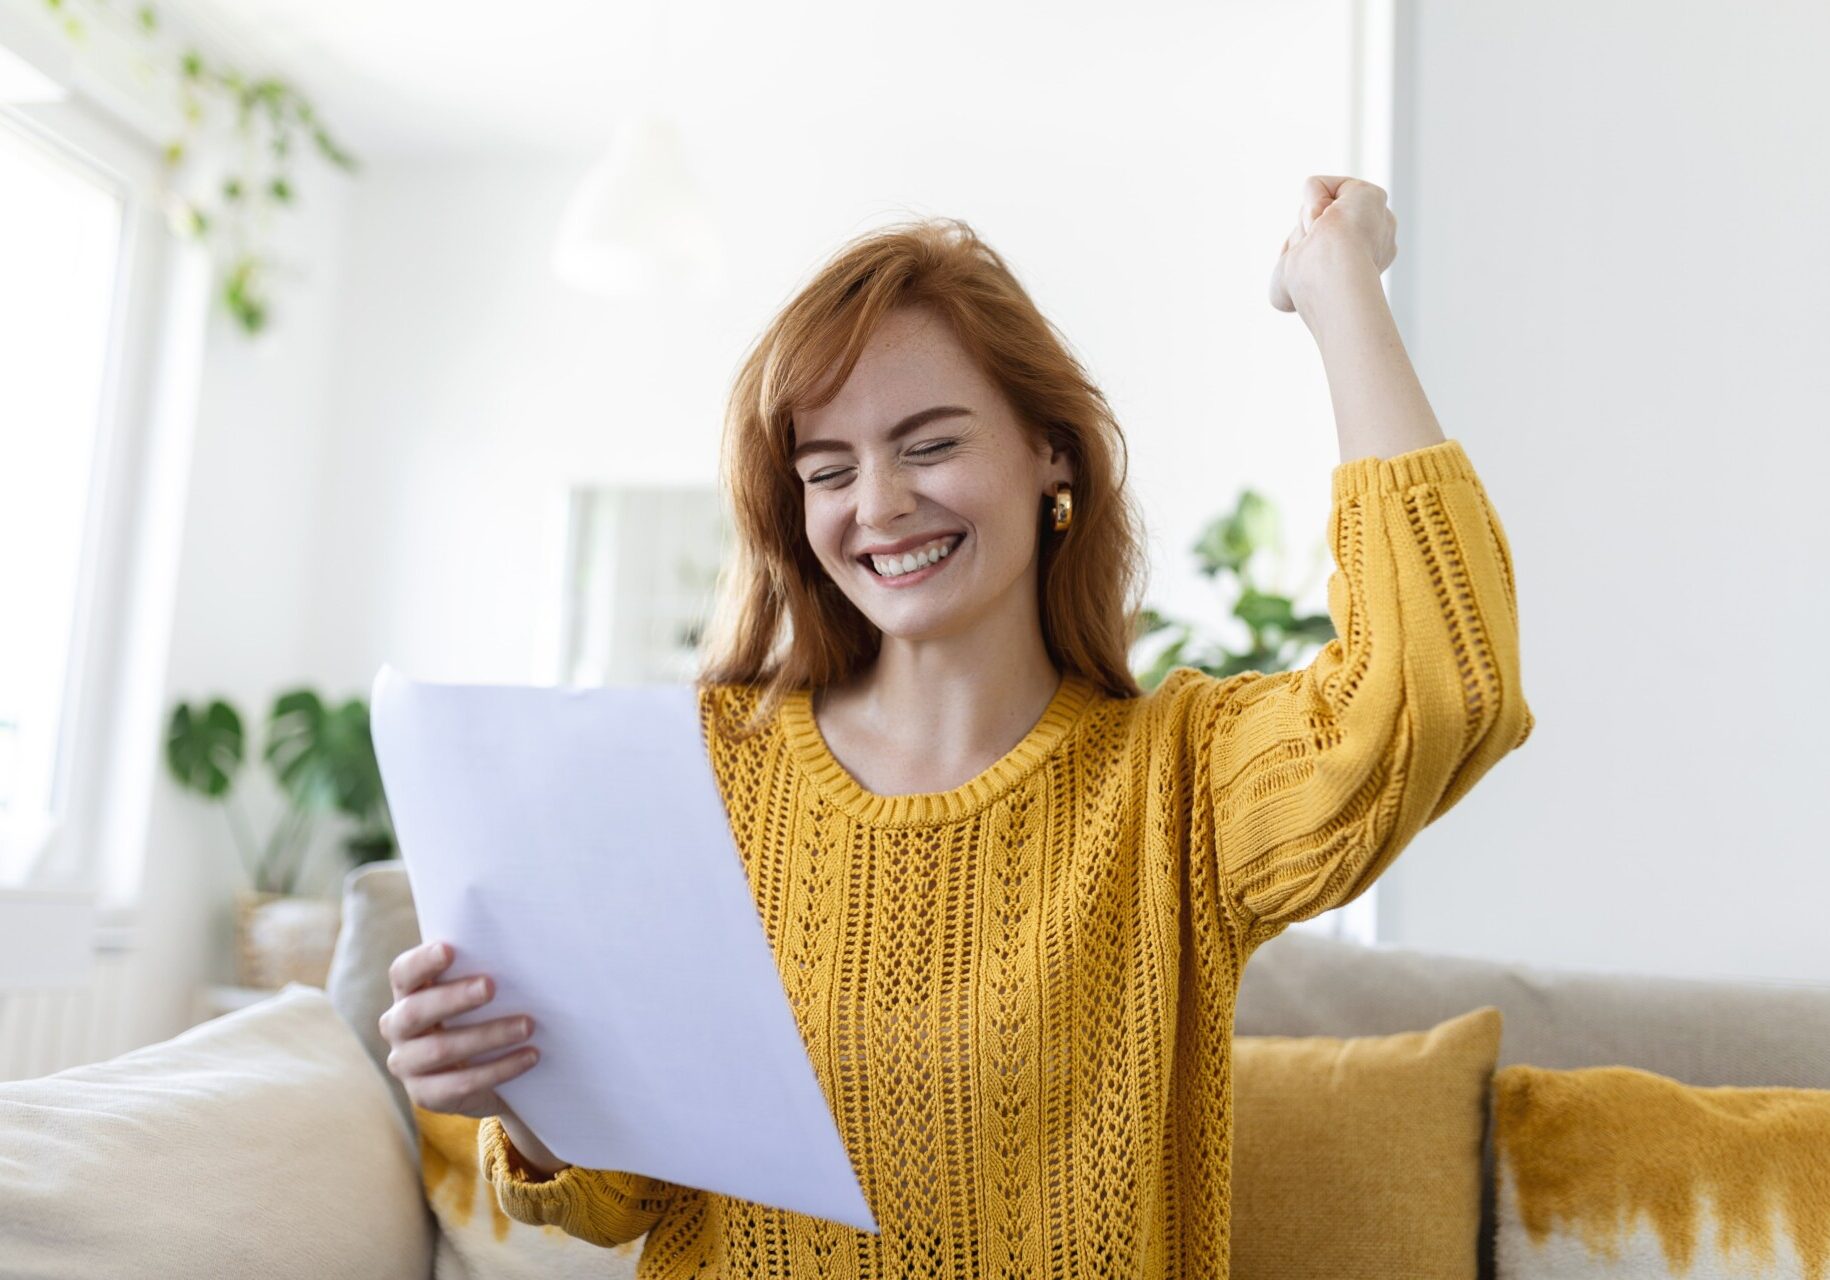 Excited, smiling young woman holds a paper with her right hand while making an excited fist motion with her left hand while sitting on a couch.